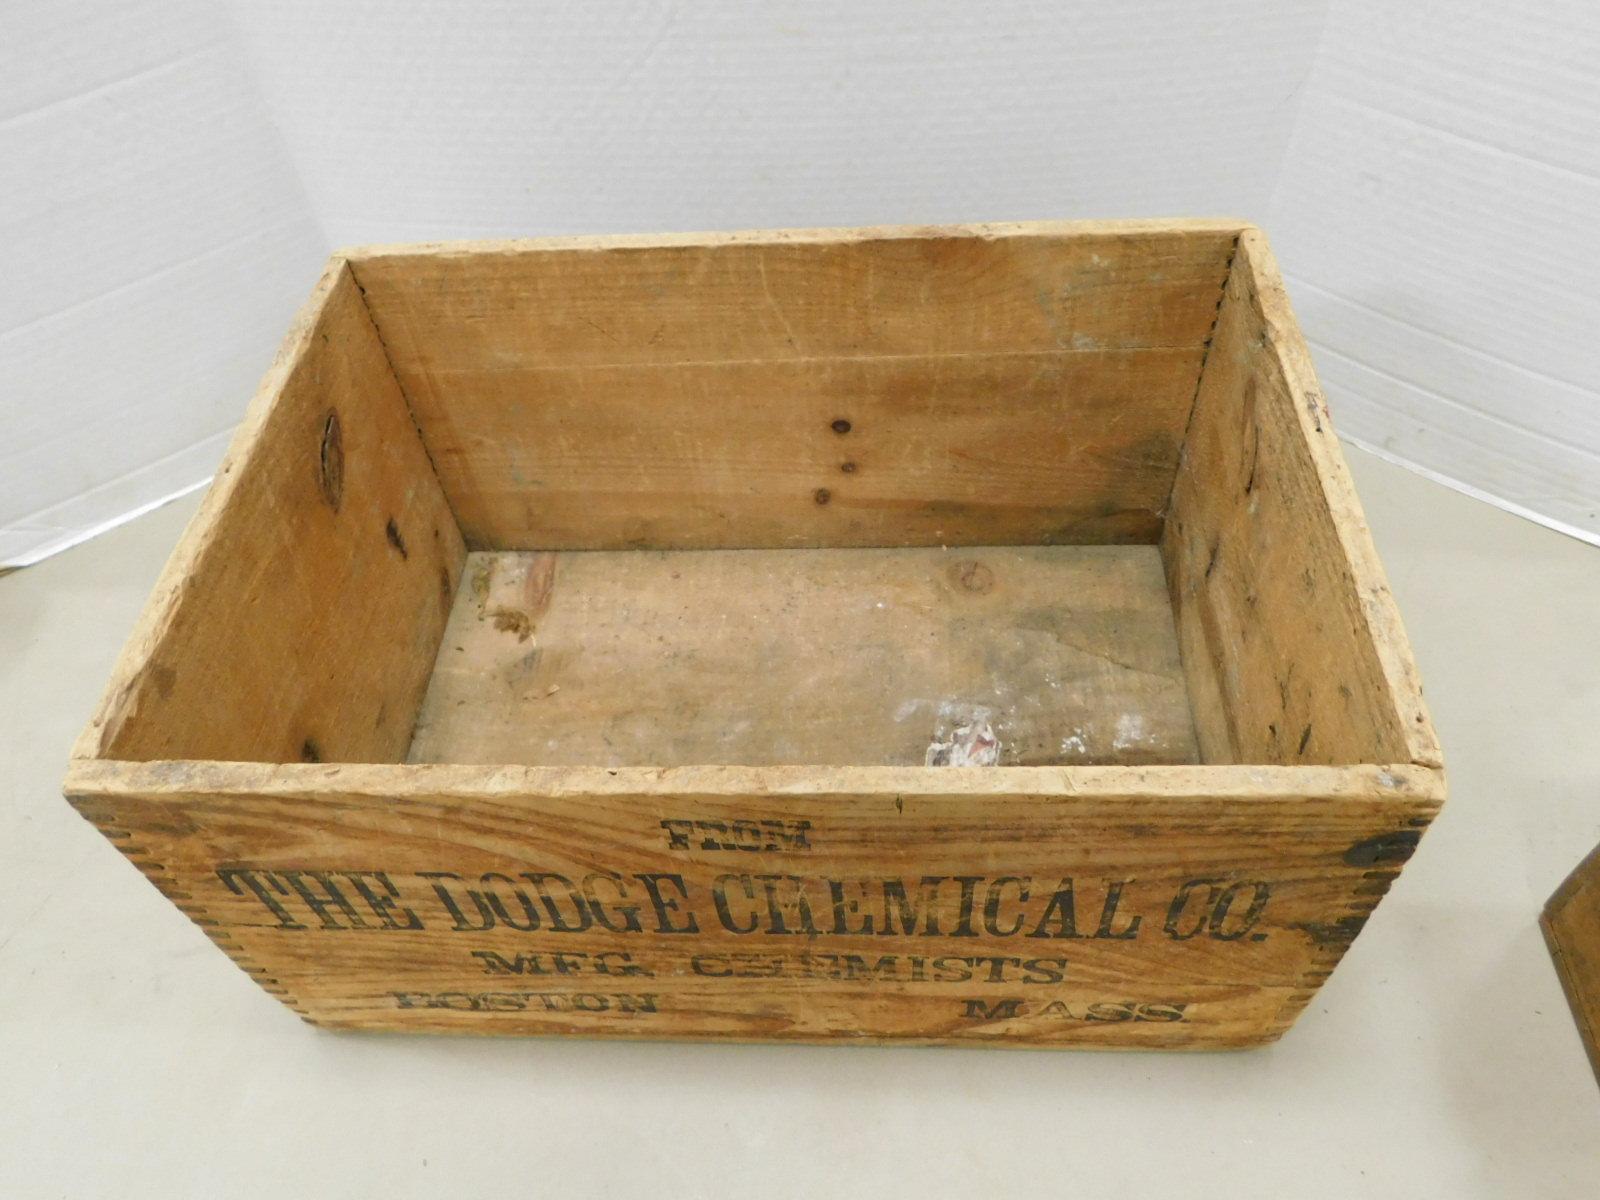 "THE DODGE CHEMICAL CO. DOVETAILED WOODEN CRATE